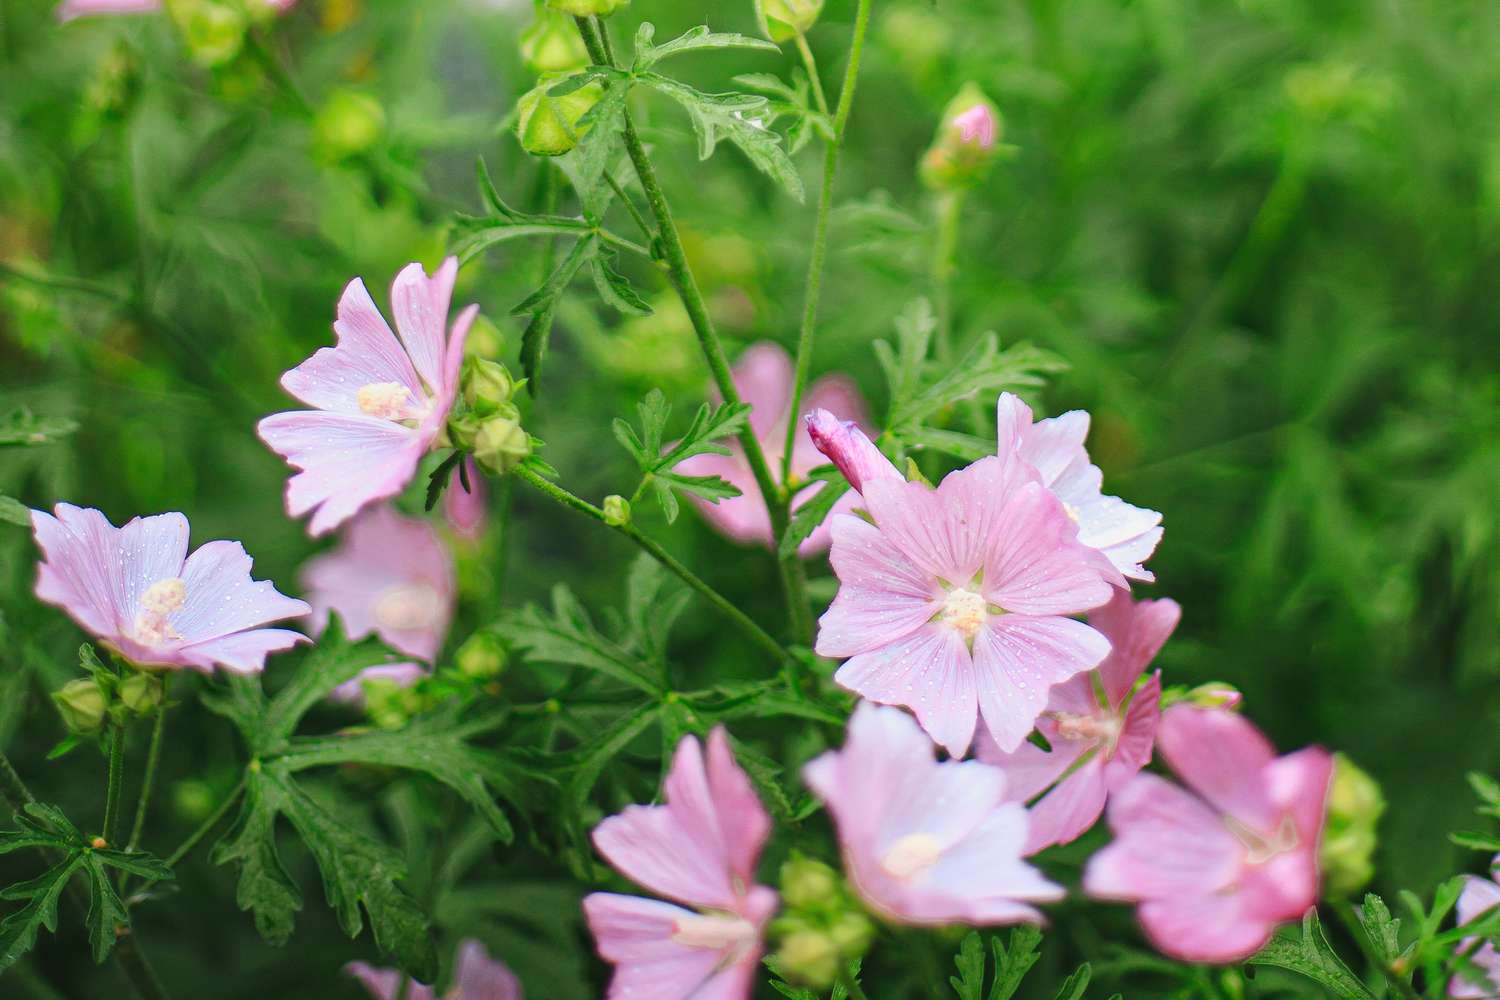 How Hardy are Lavatera Plants?